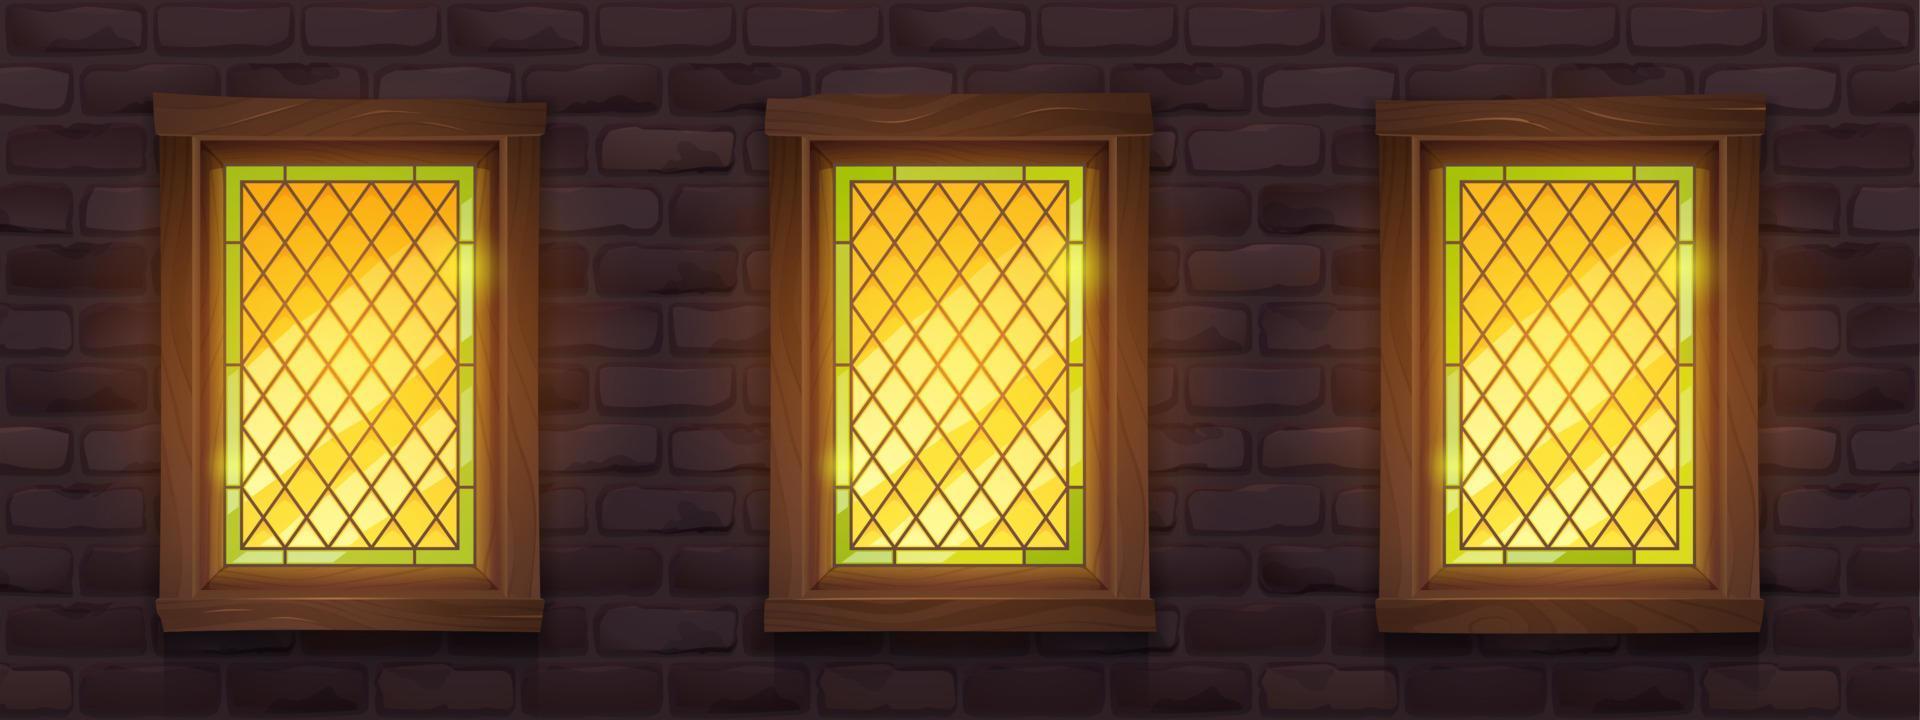 Old brick wall with glow stained windows at night vector